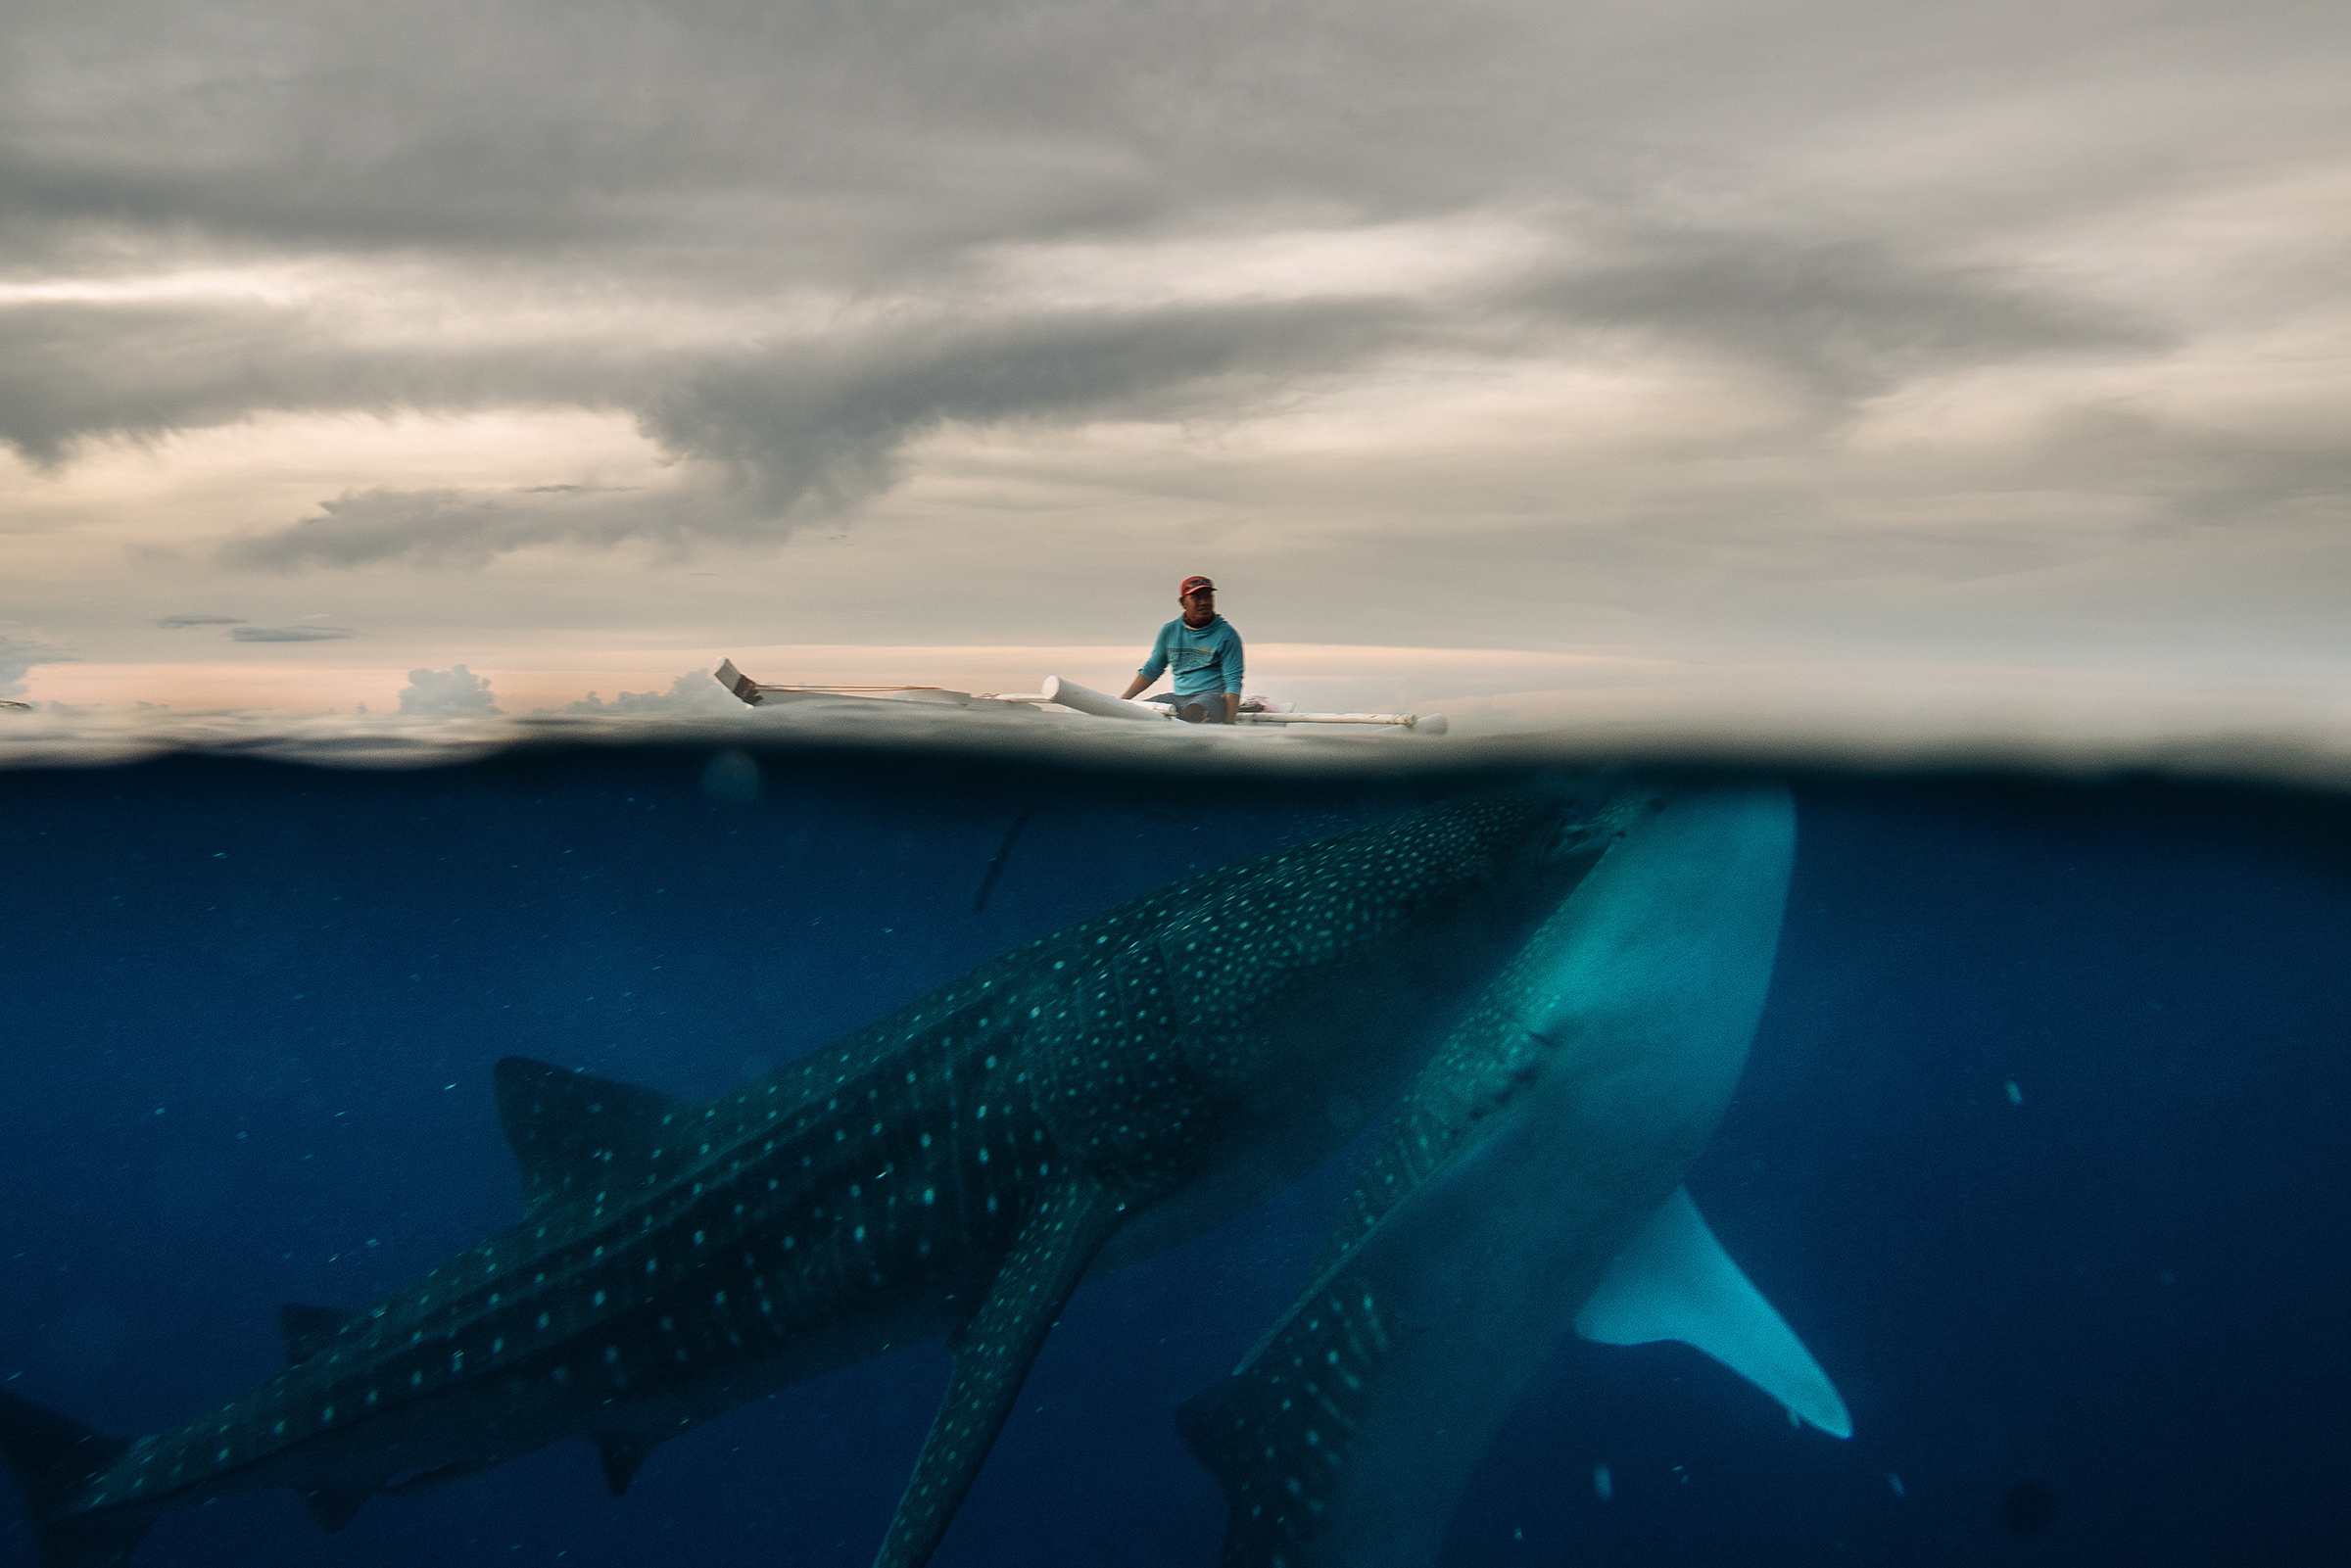 A fisherman feeds whale sharks in the waters around Tan-Awan, a small town in Cebu Province in the Philippines, in September 2021. The chance to swim with the world's biggest fish drew tourists to a Philippines town, but conservation groups denounce the hand-feeding that keeps the gentle creatures around.